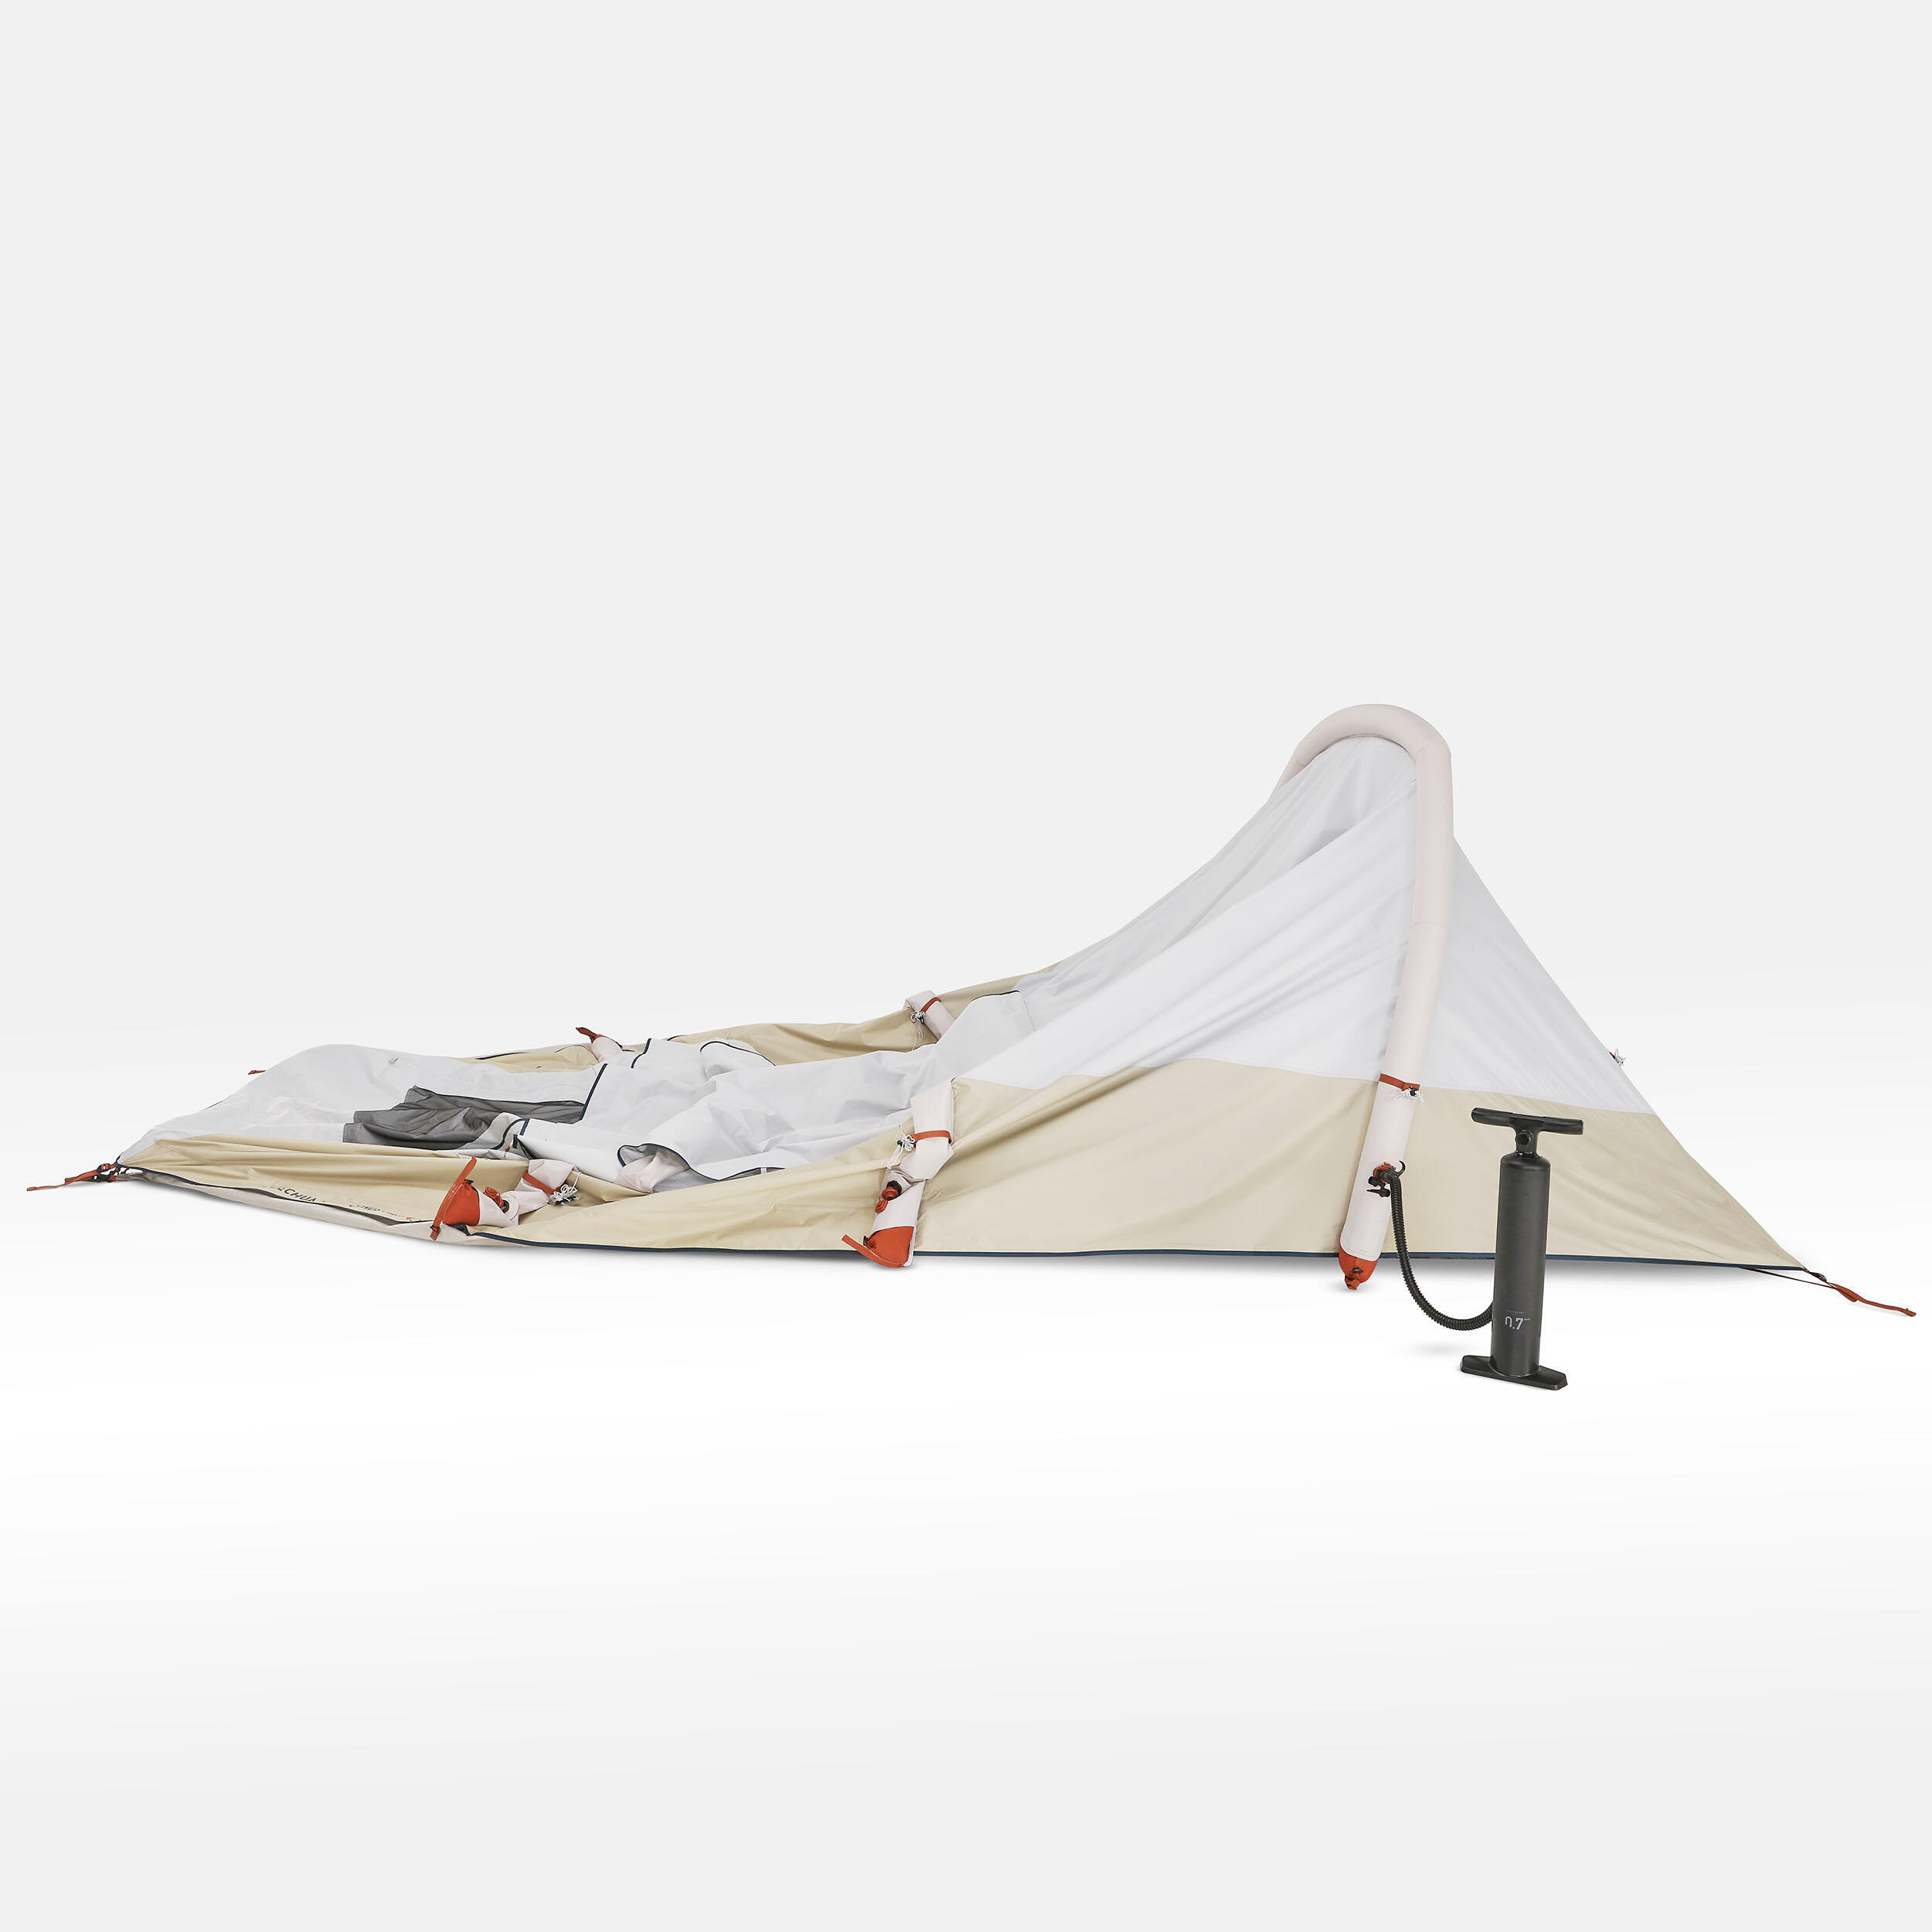 4 Man Inflatable Blackout Tent - Air Seconds 4.1 F&B 28/32